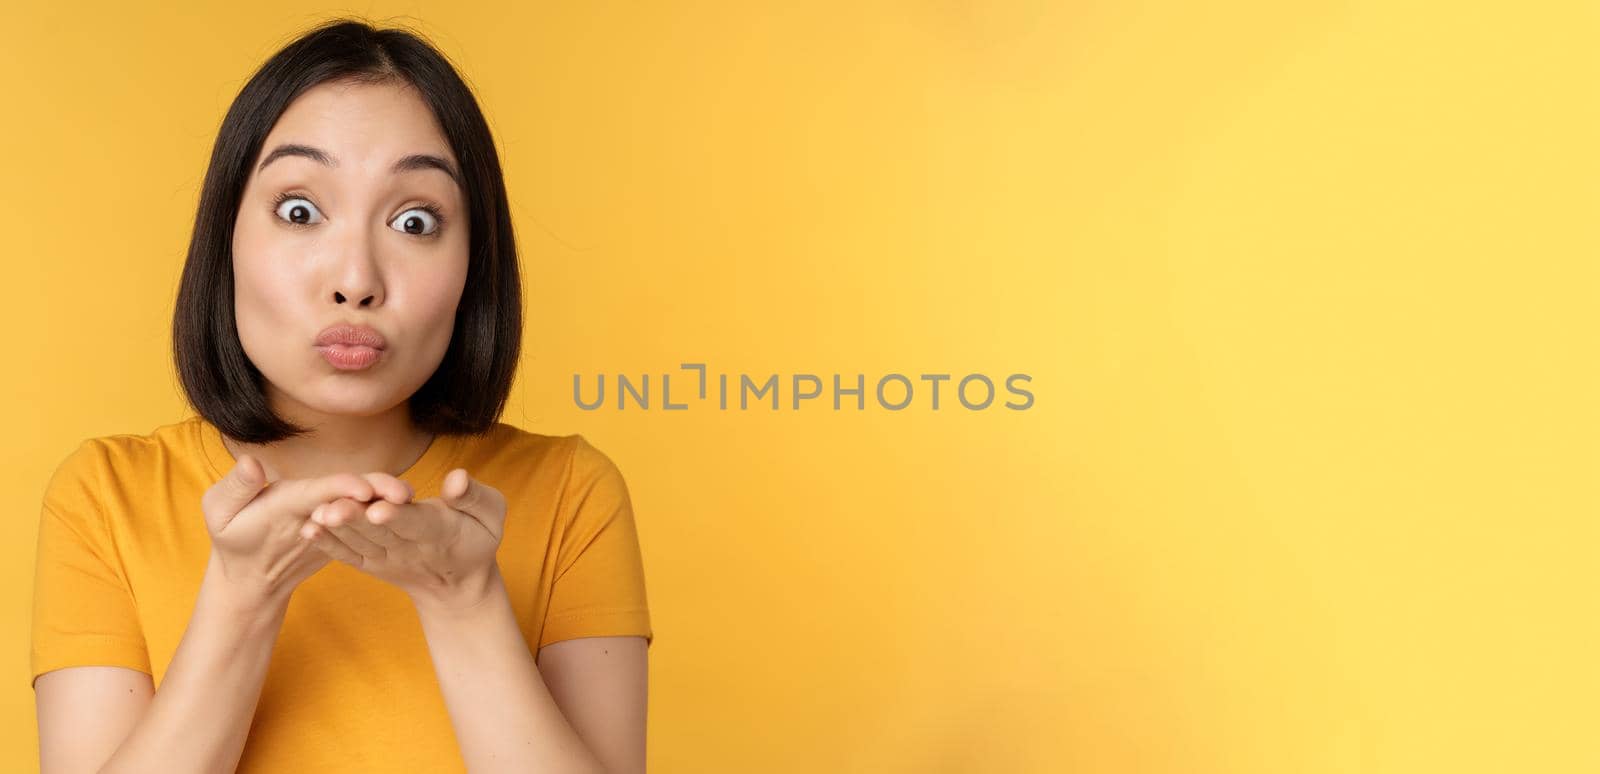 Cute asian girl sending air kiss, blowing mwah with puckered lips, standing over yellow background by Benzoix